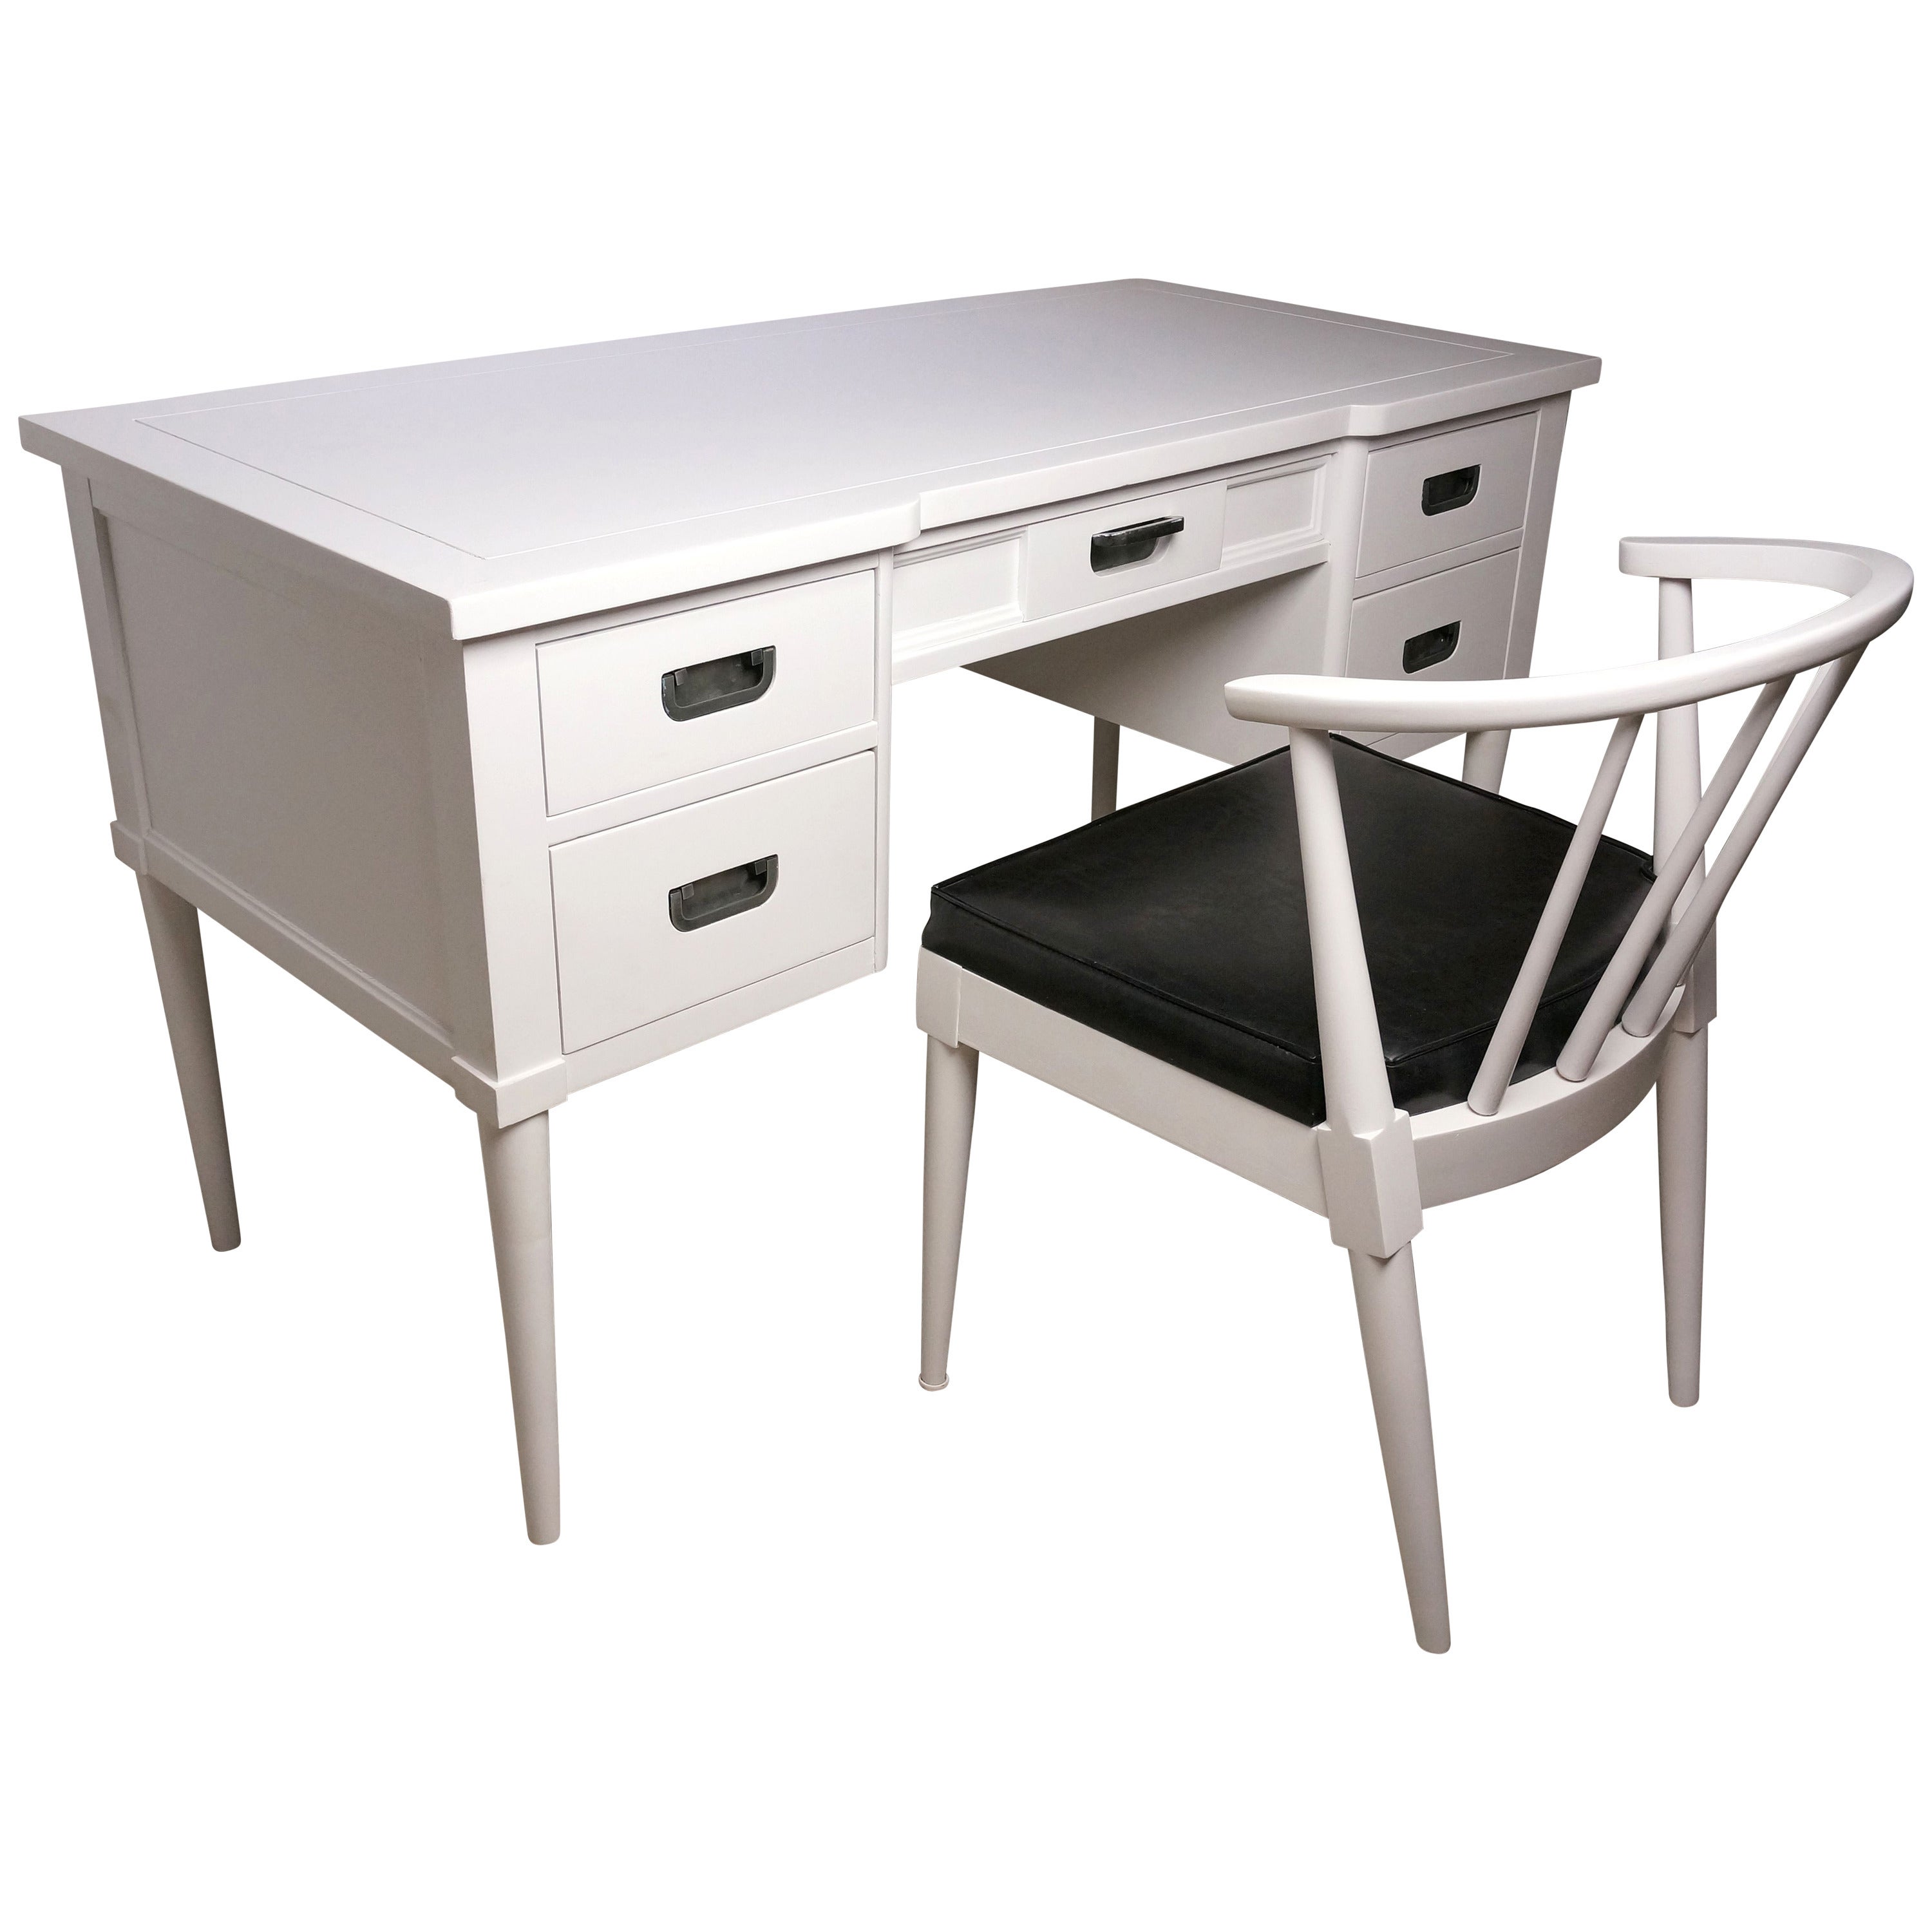 Midcentury White Lacquered Desk and Chair, Style of Paul McCobb, 1950s